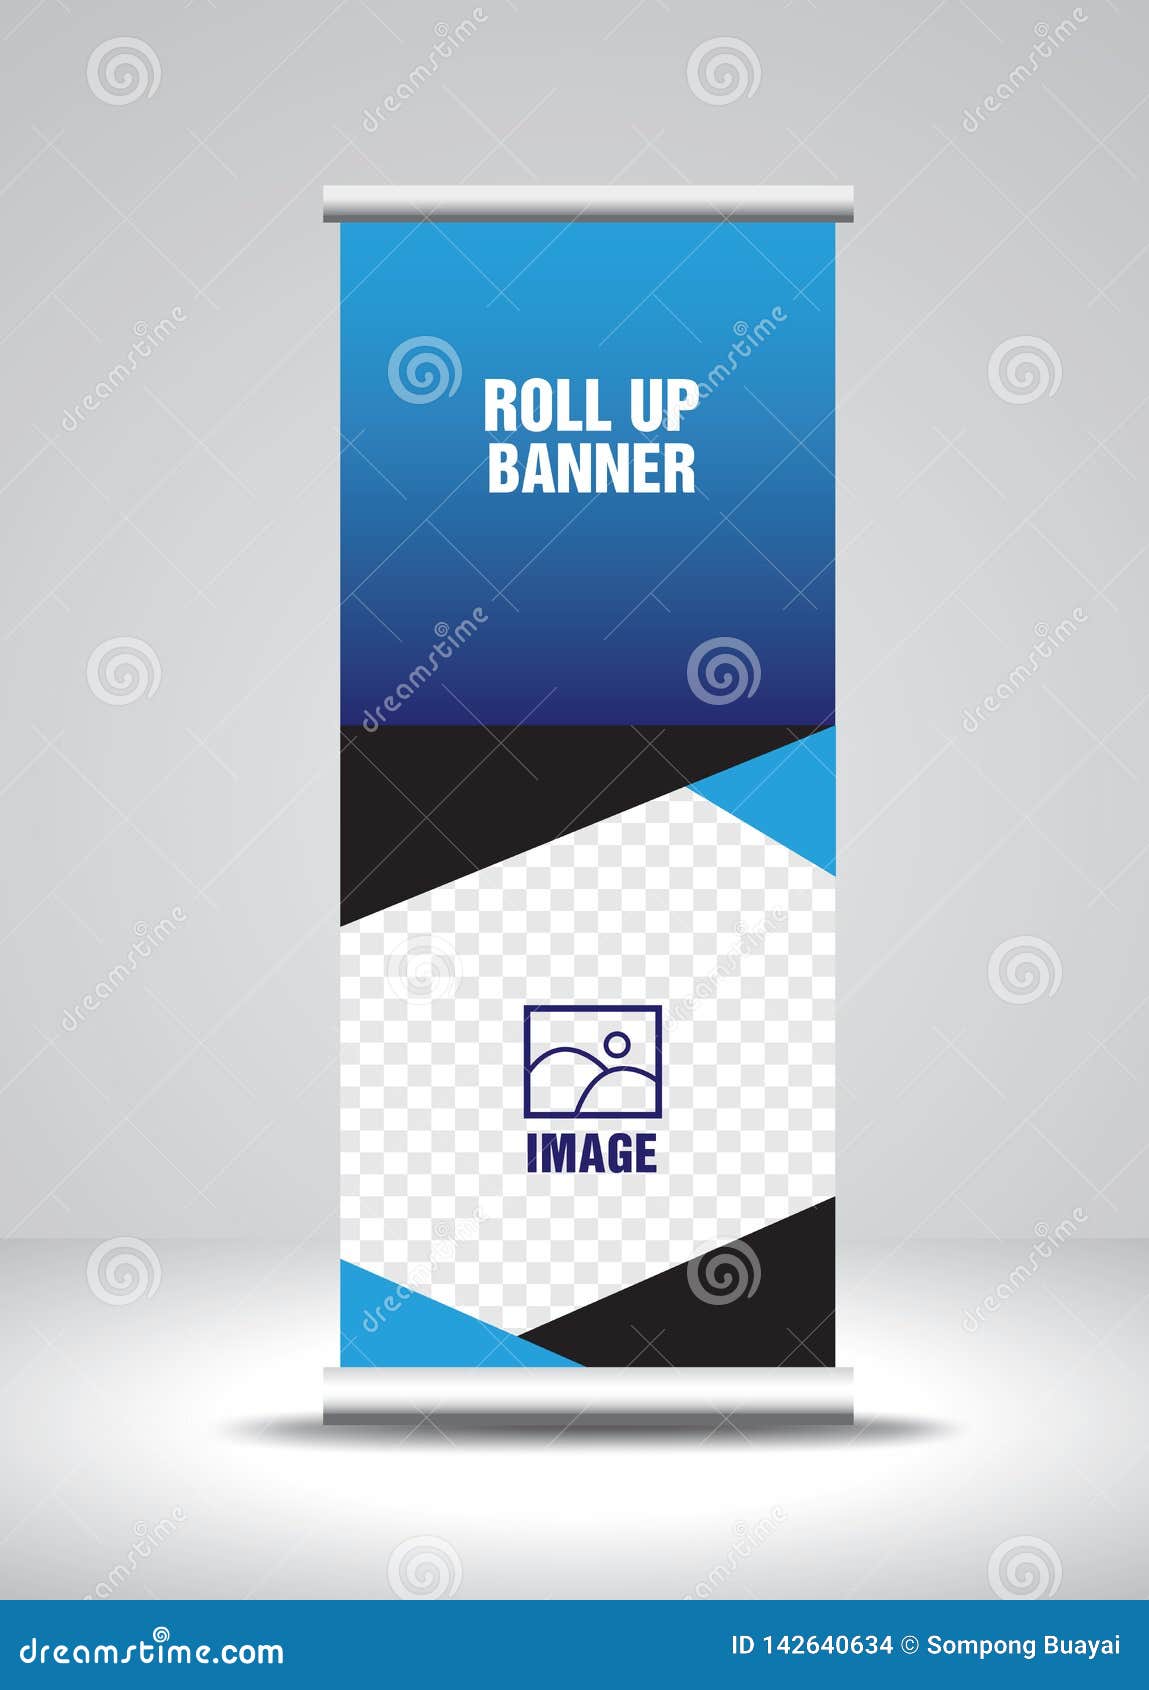 Pull Up Banner Template from thumbs.dreamstime.com